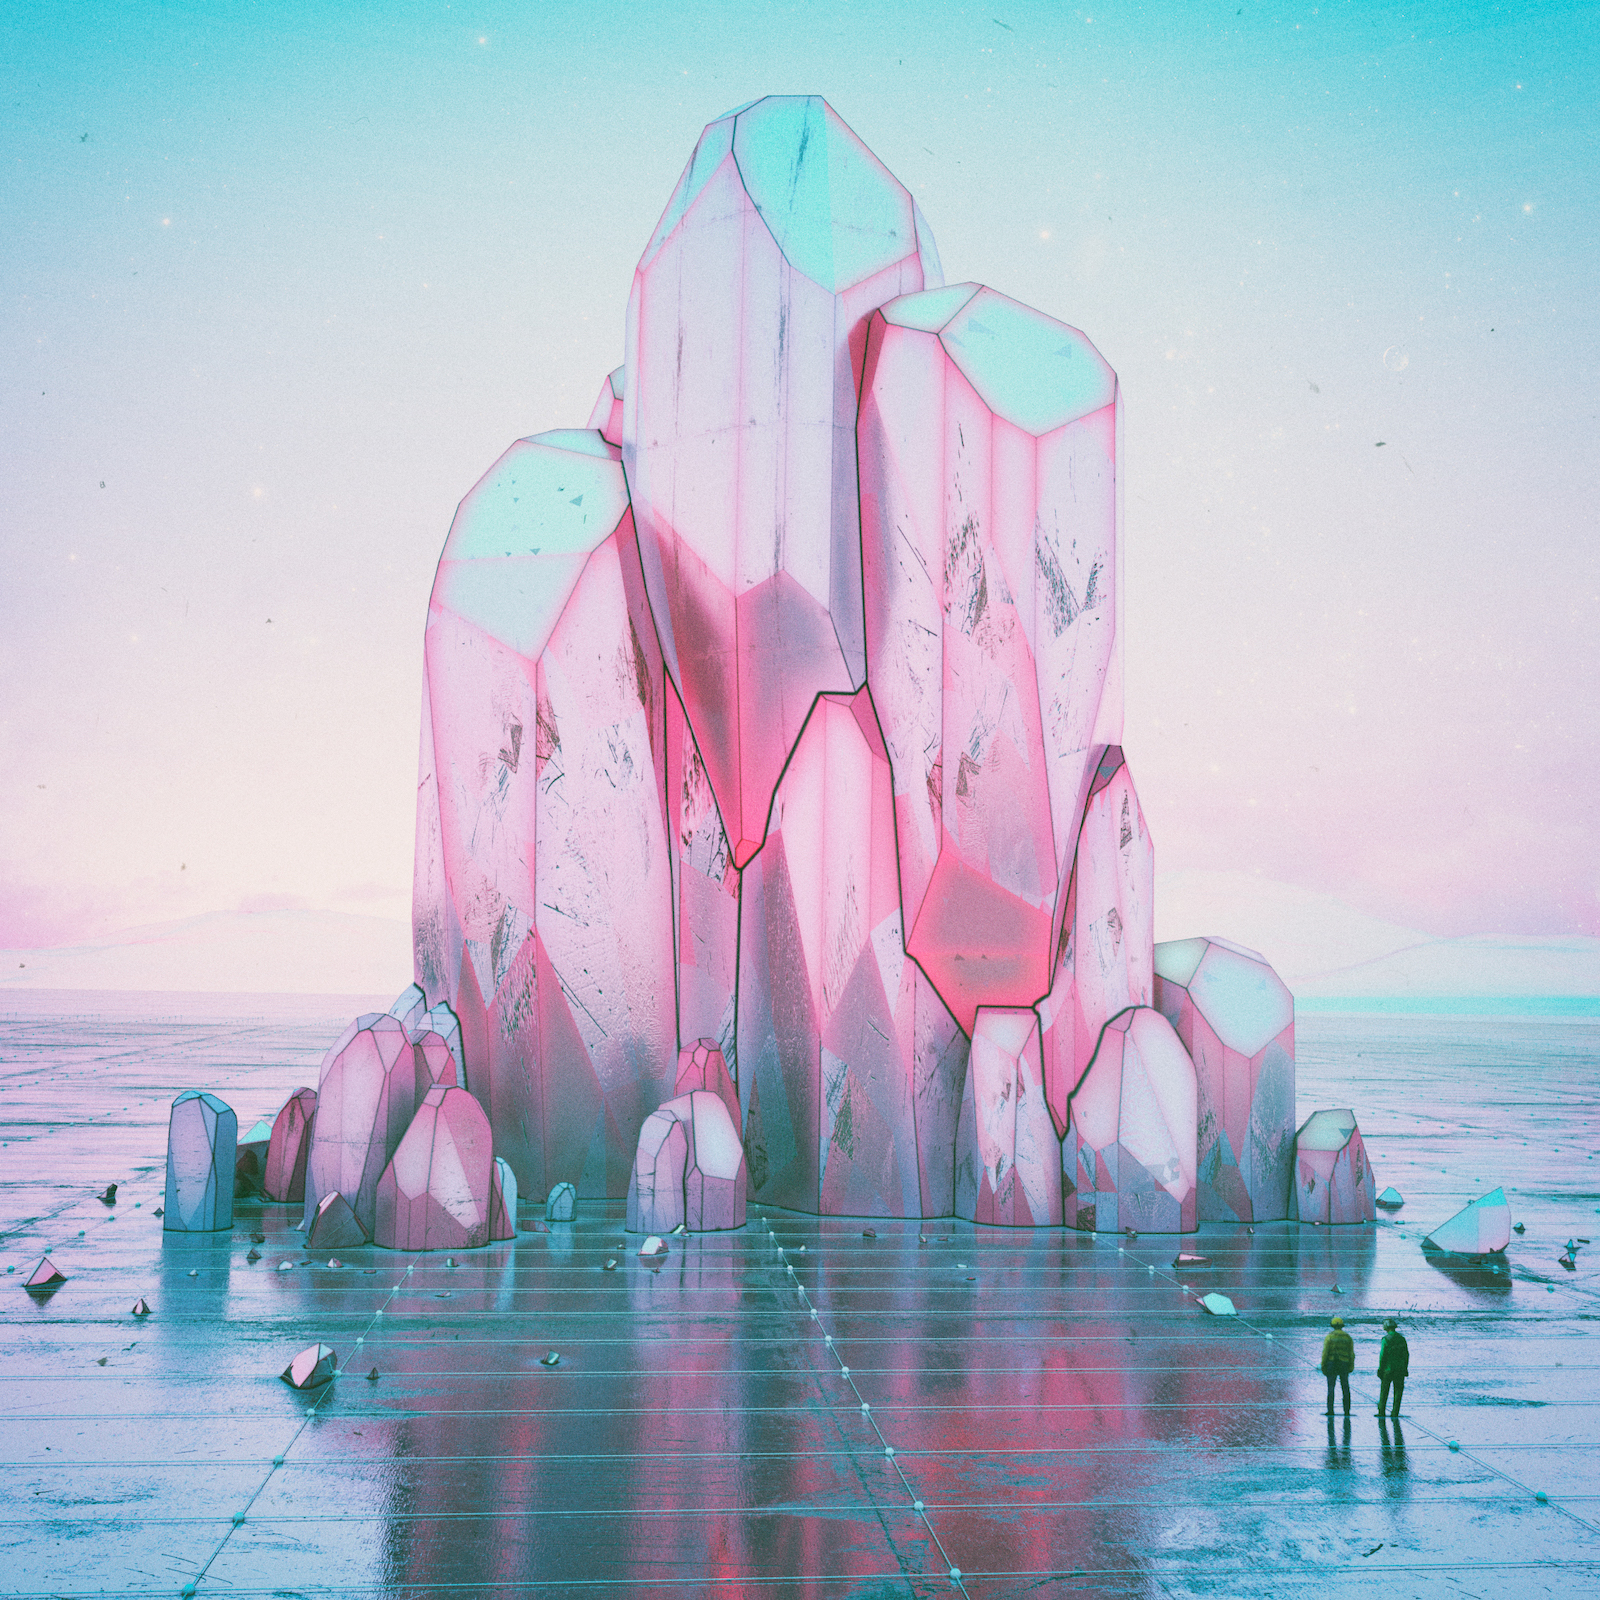 How Beeple's Commitment to Creating Art Every Day Led to Huge